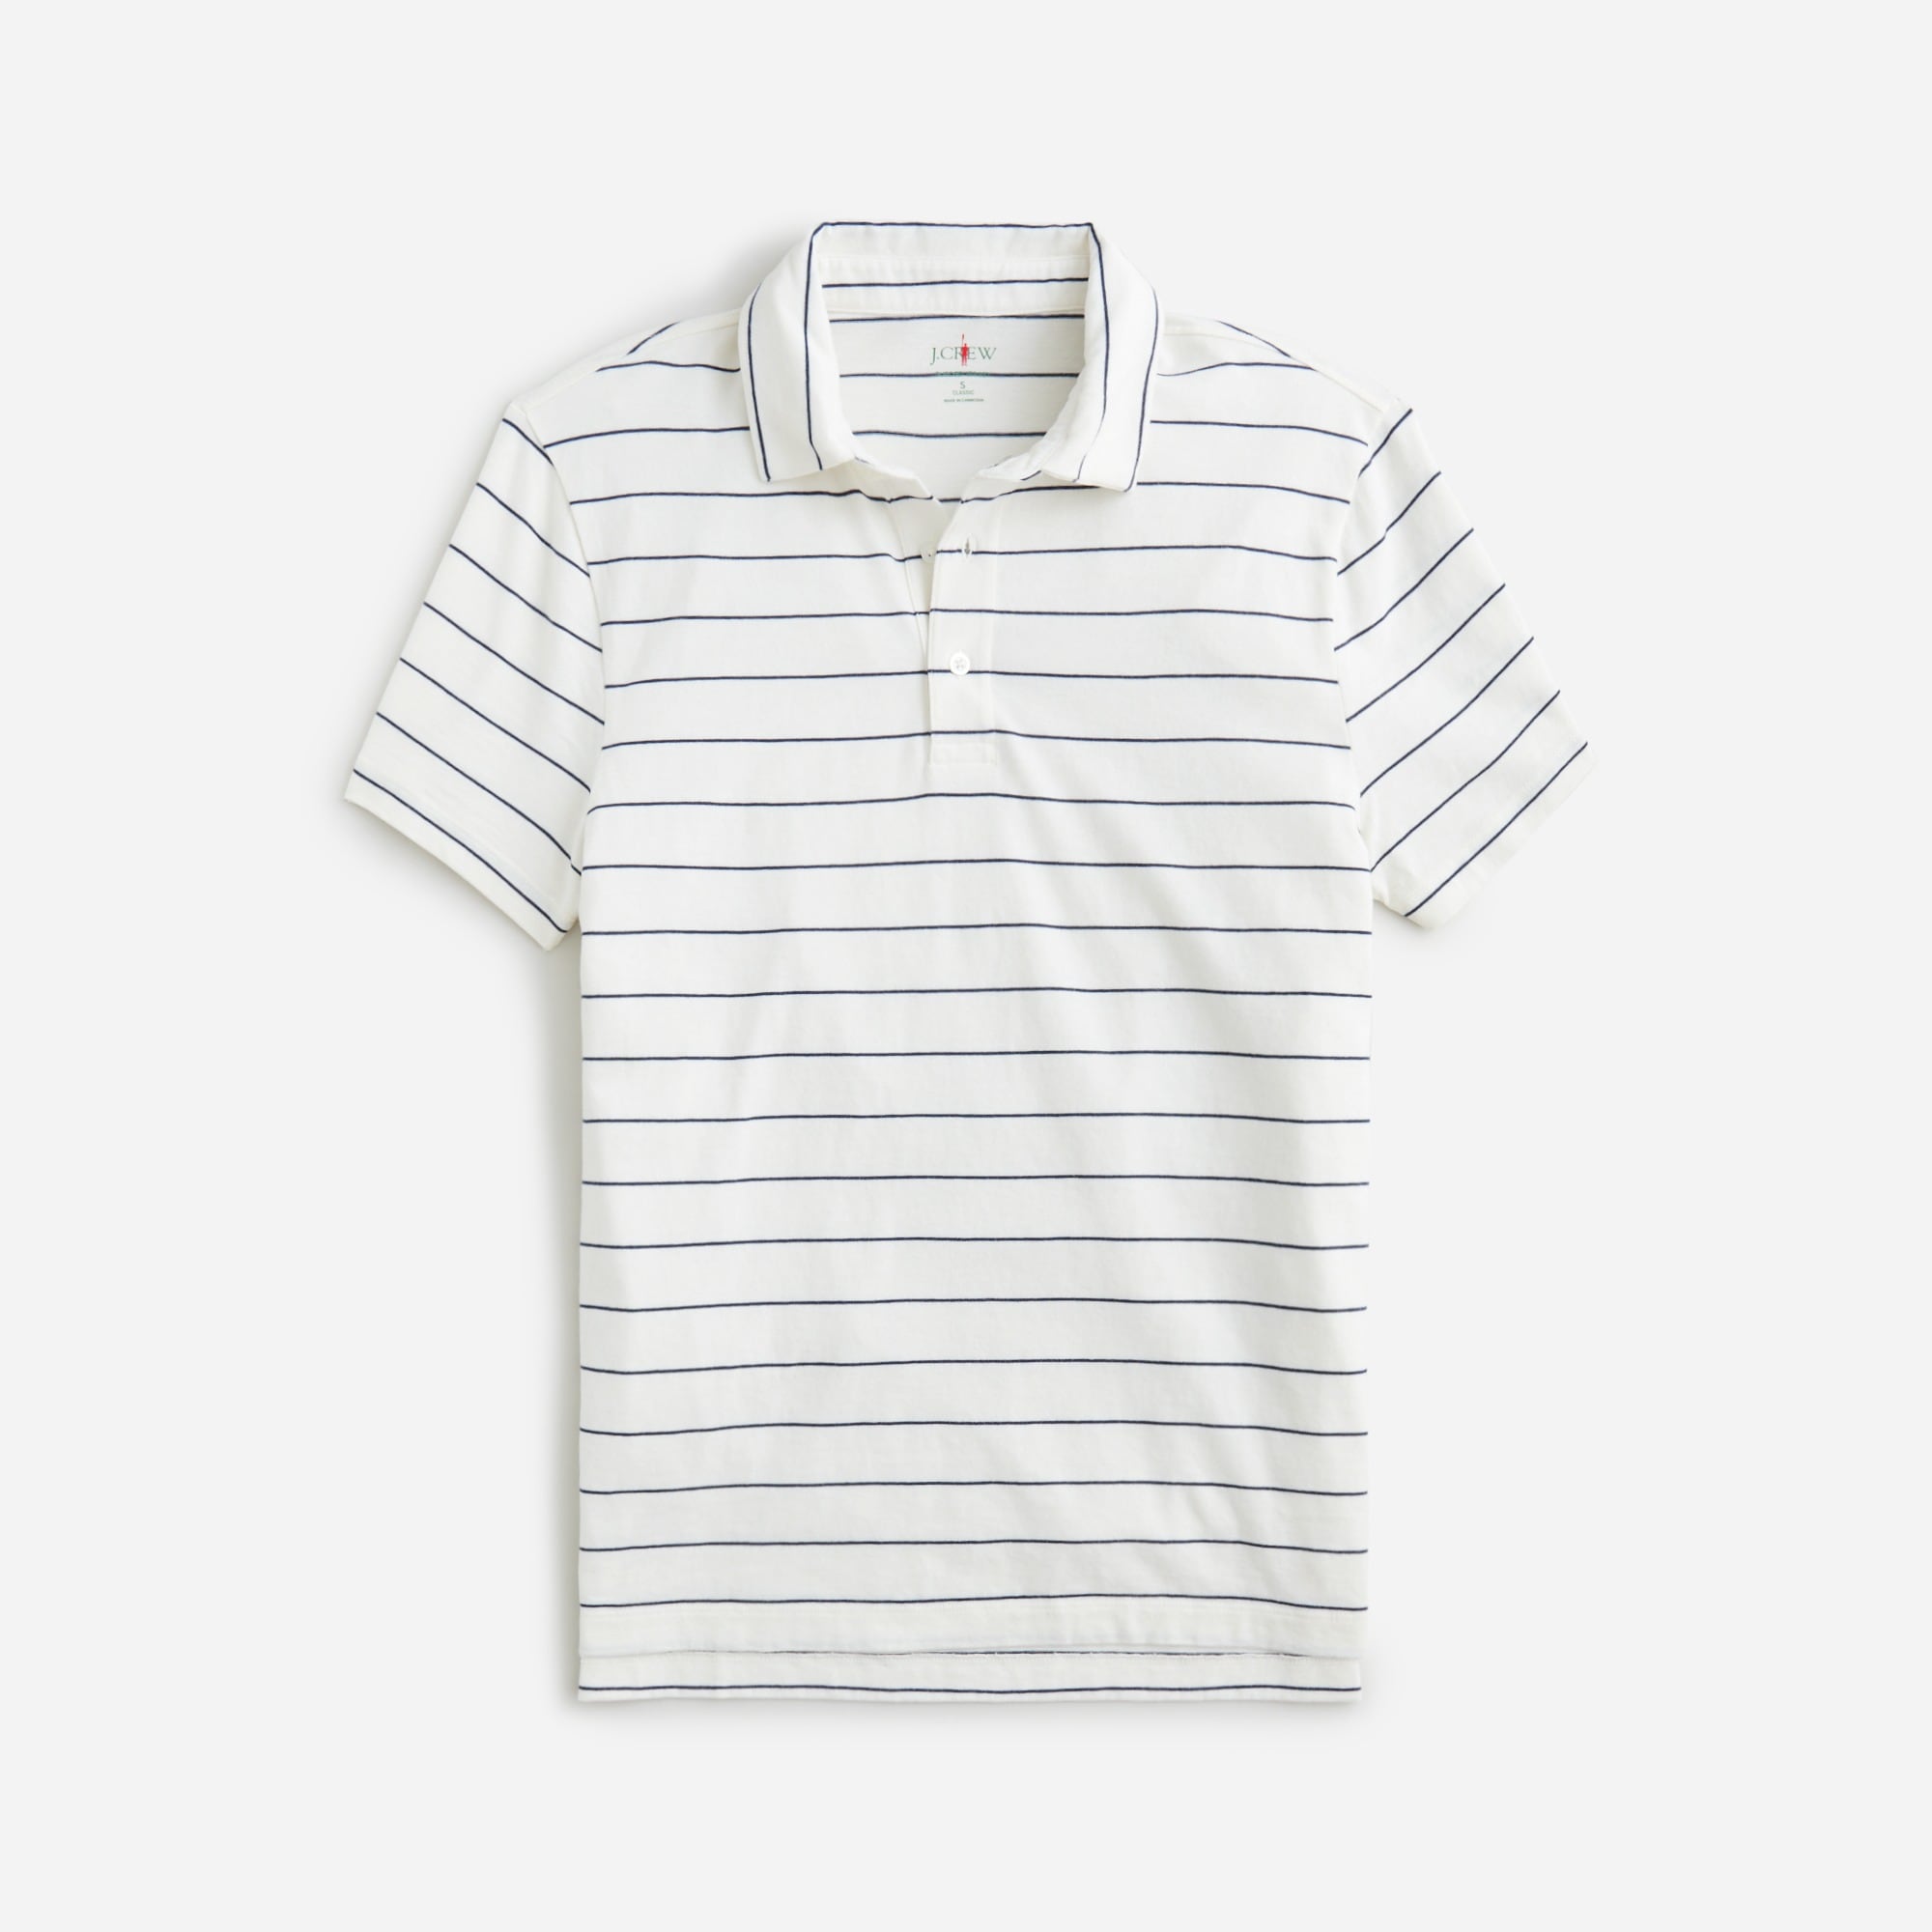  Classic Untucked sueded cotton polo shirt in stripe